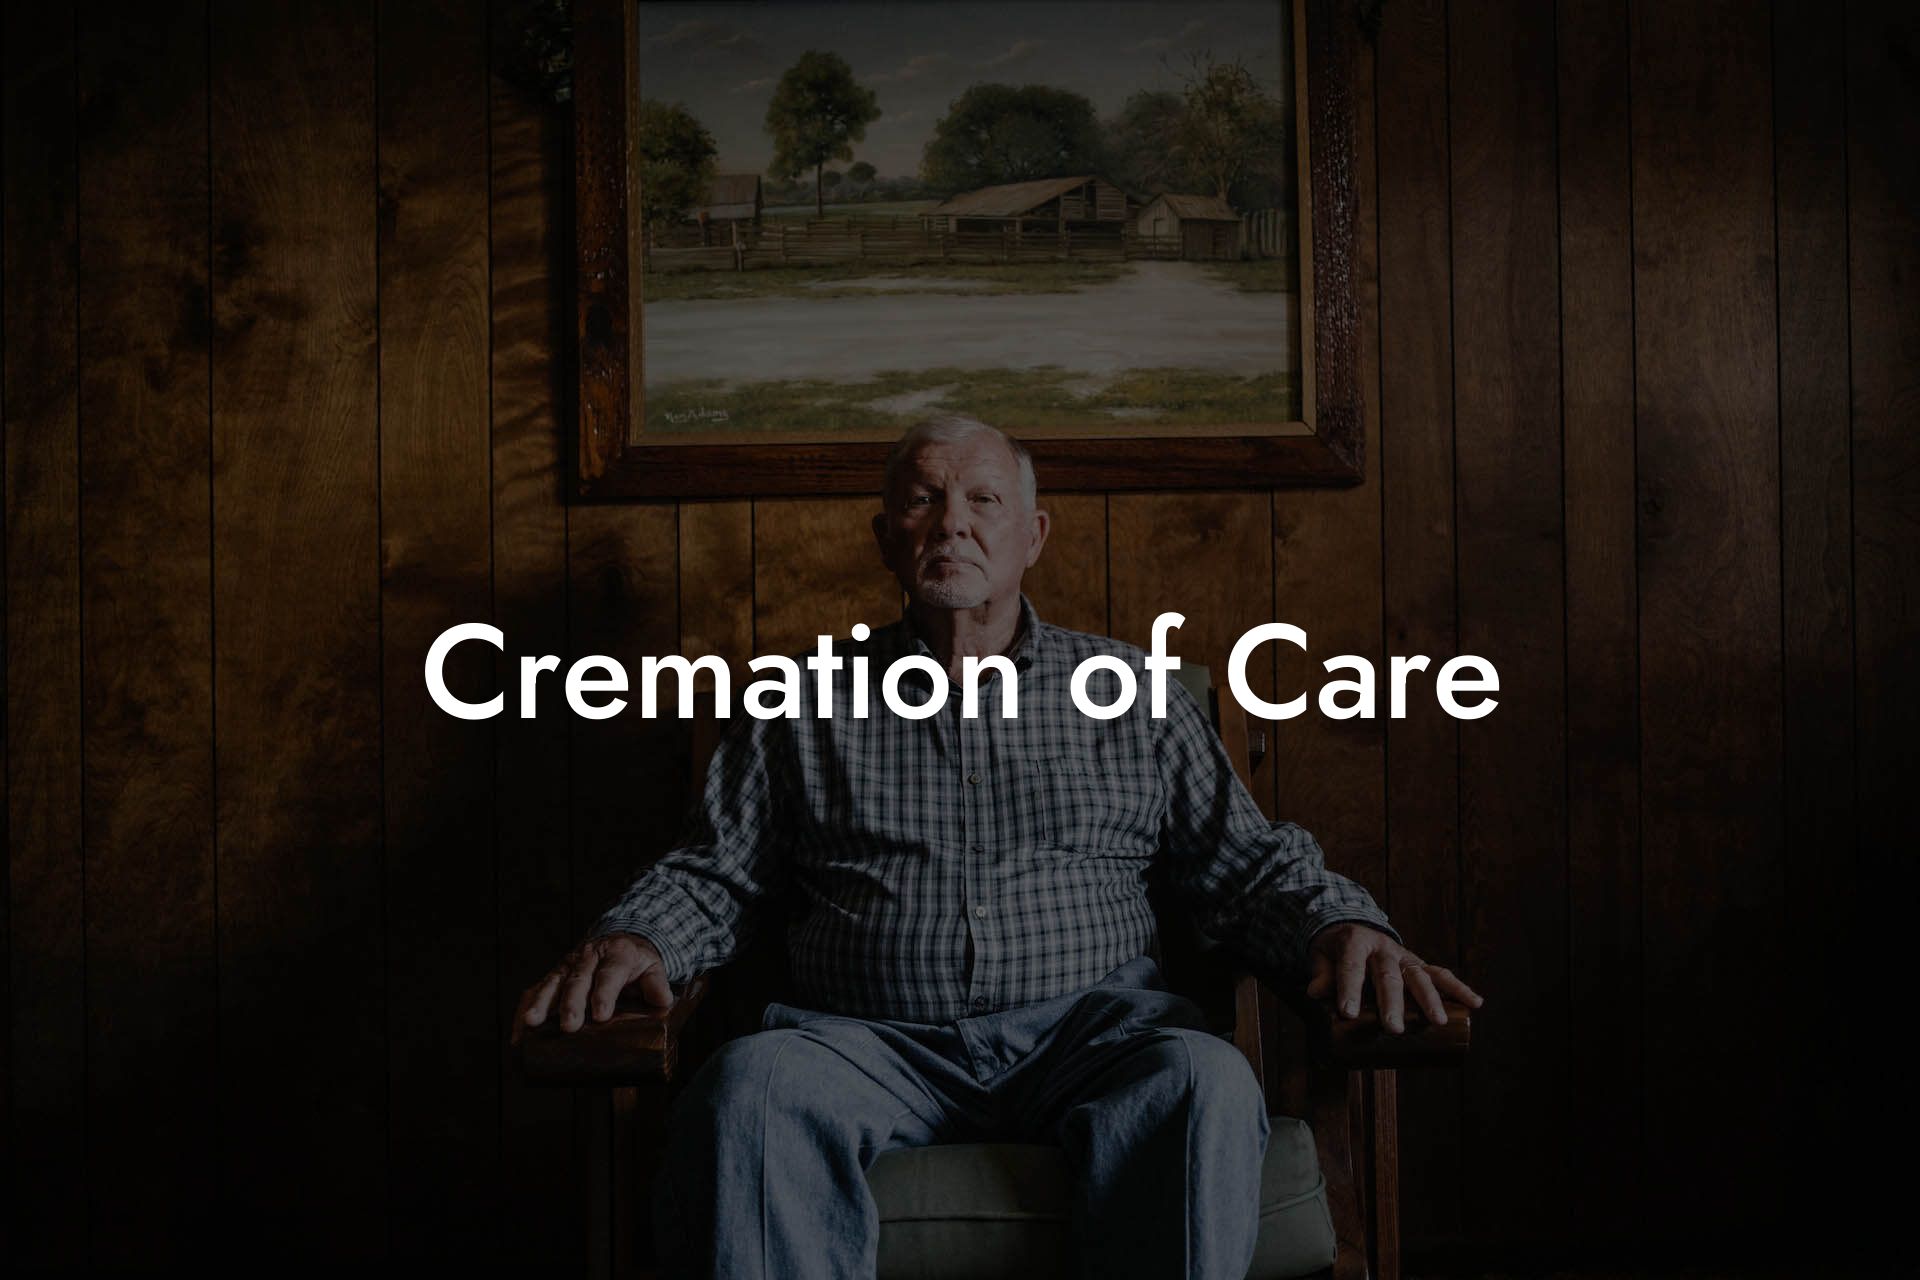 Cremation of Care